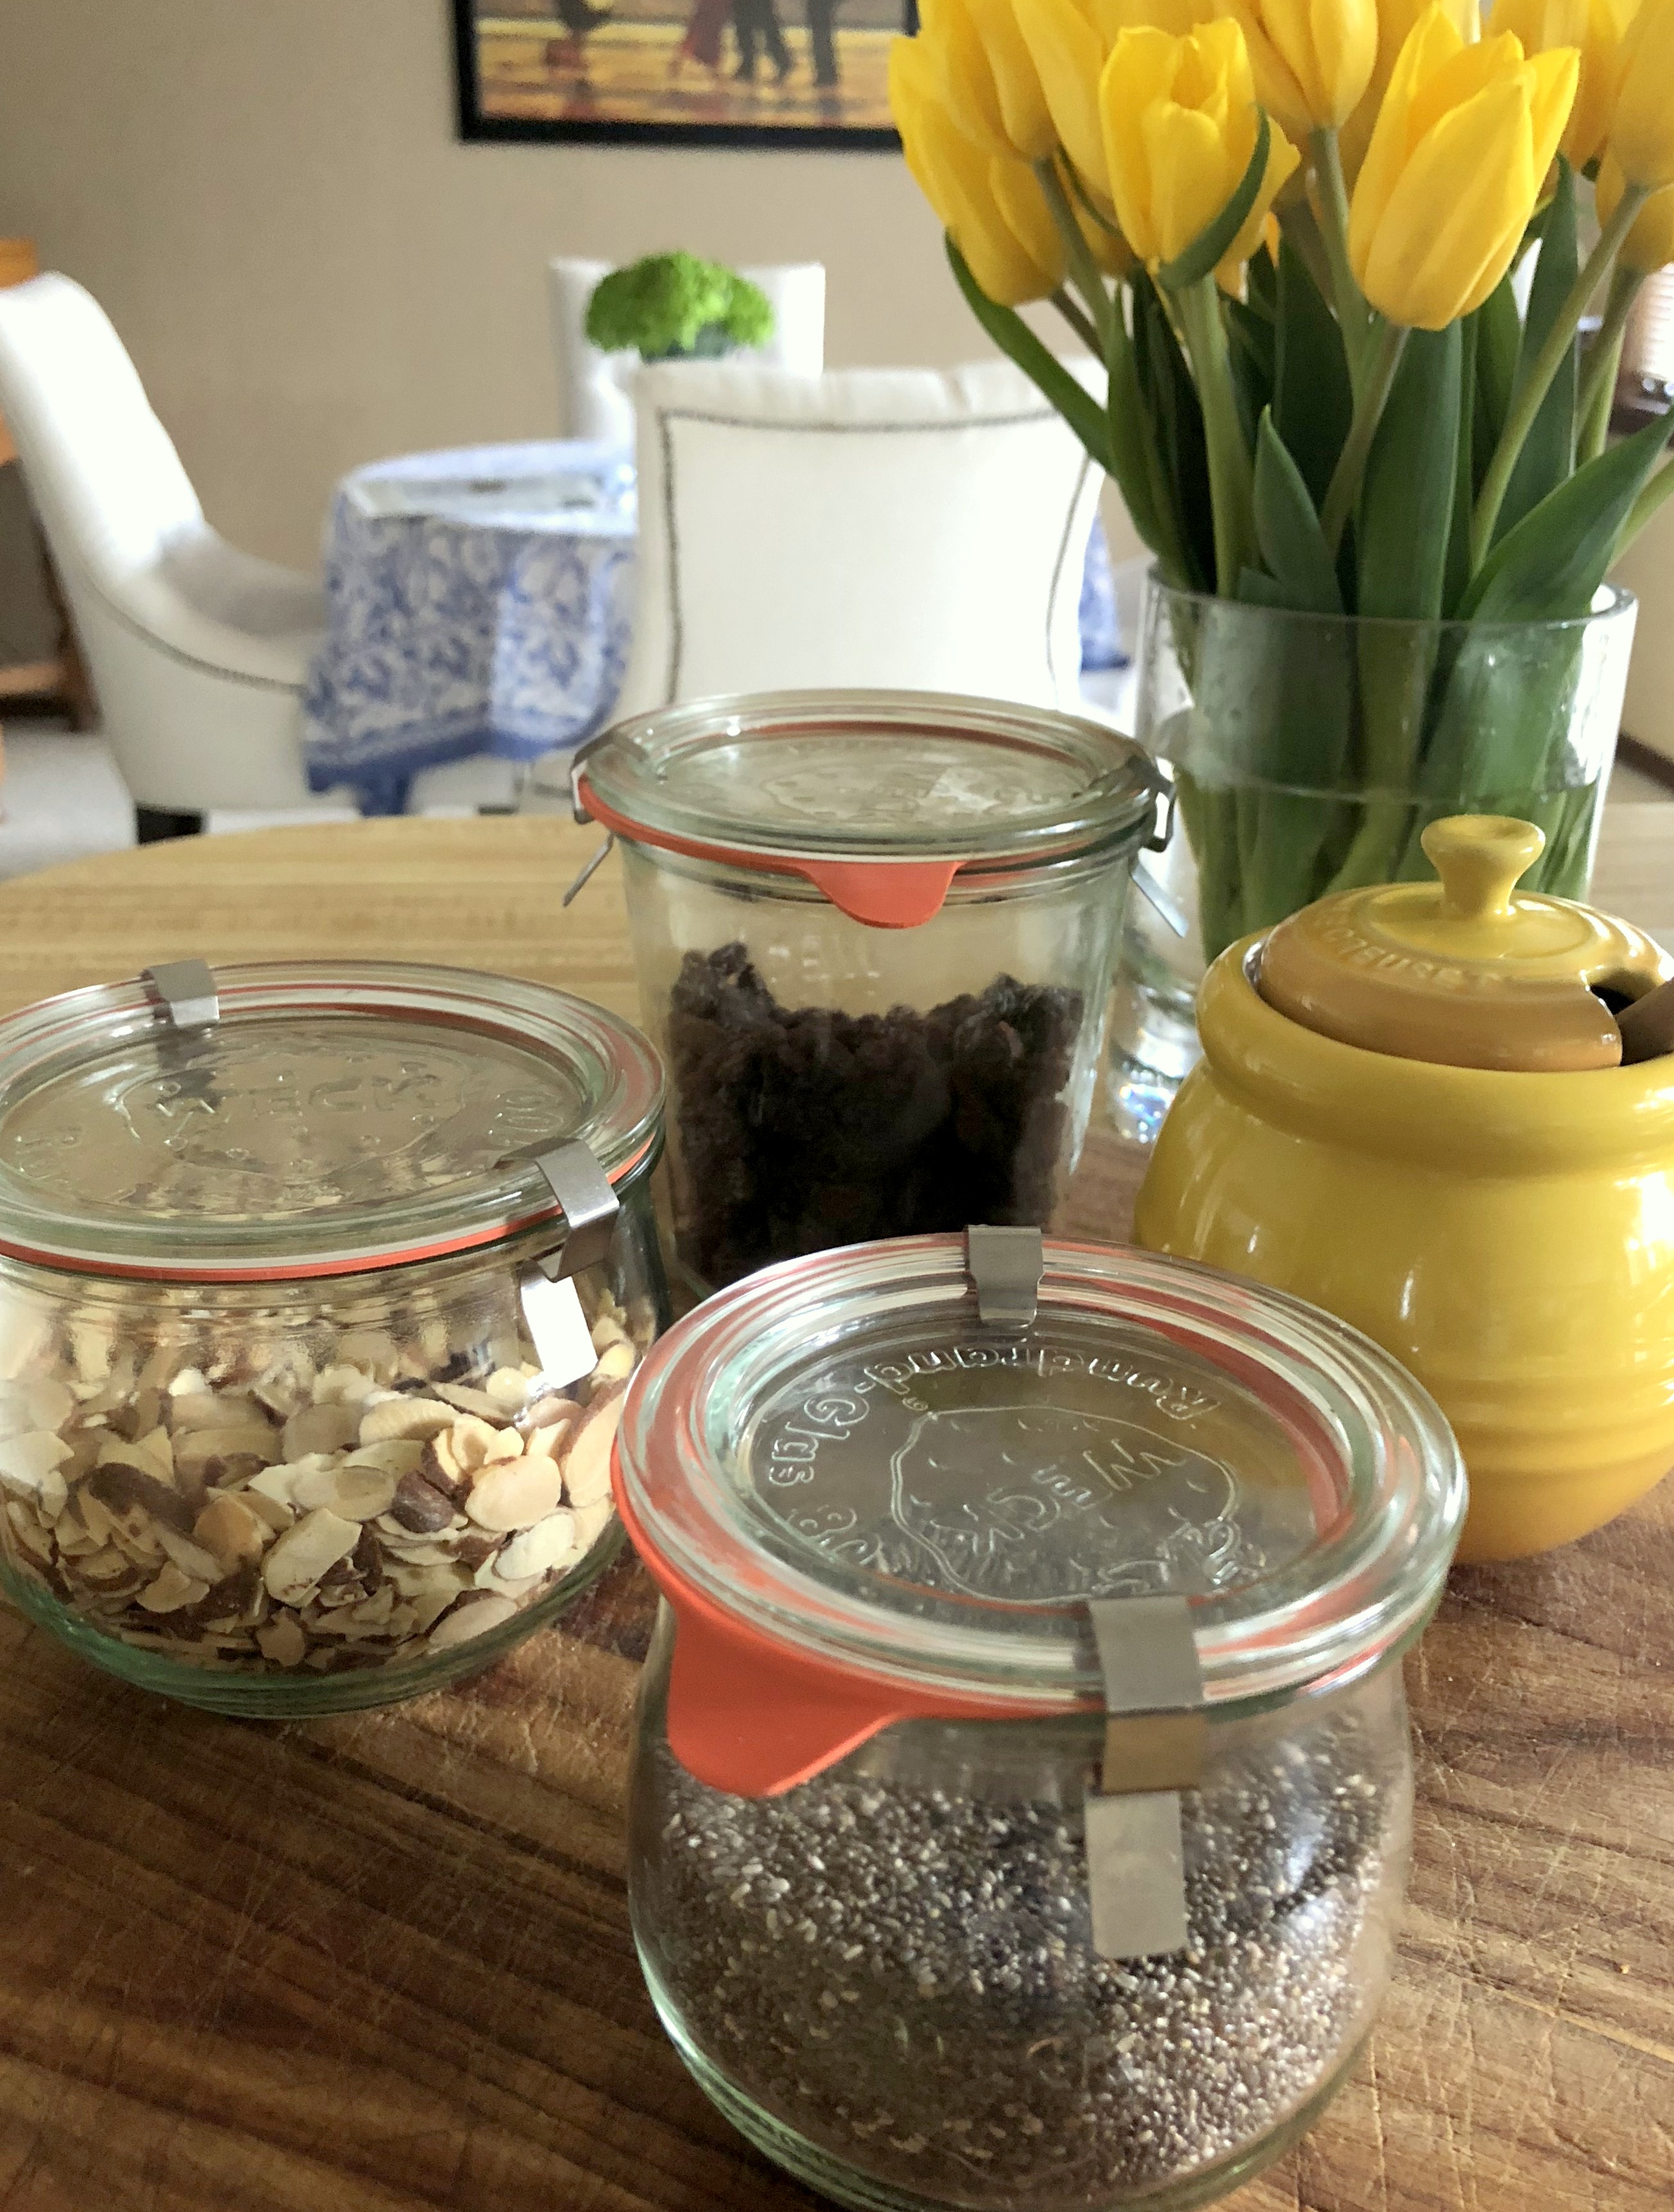 9 Ways to Organize Your Kitchen, Improve Your Health & Help Out the Planet